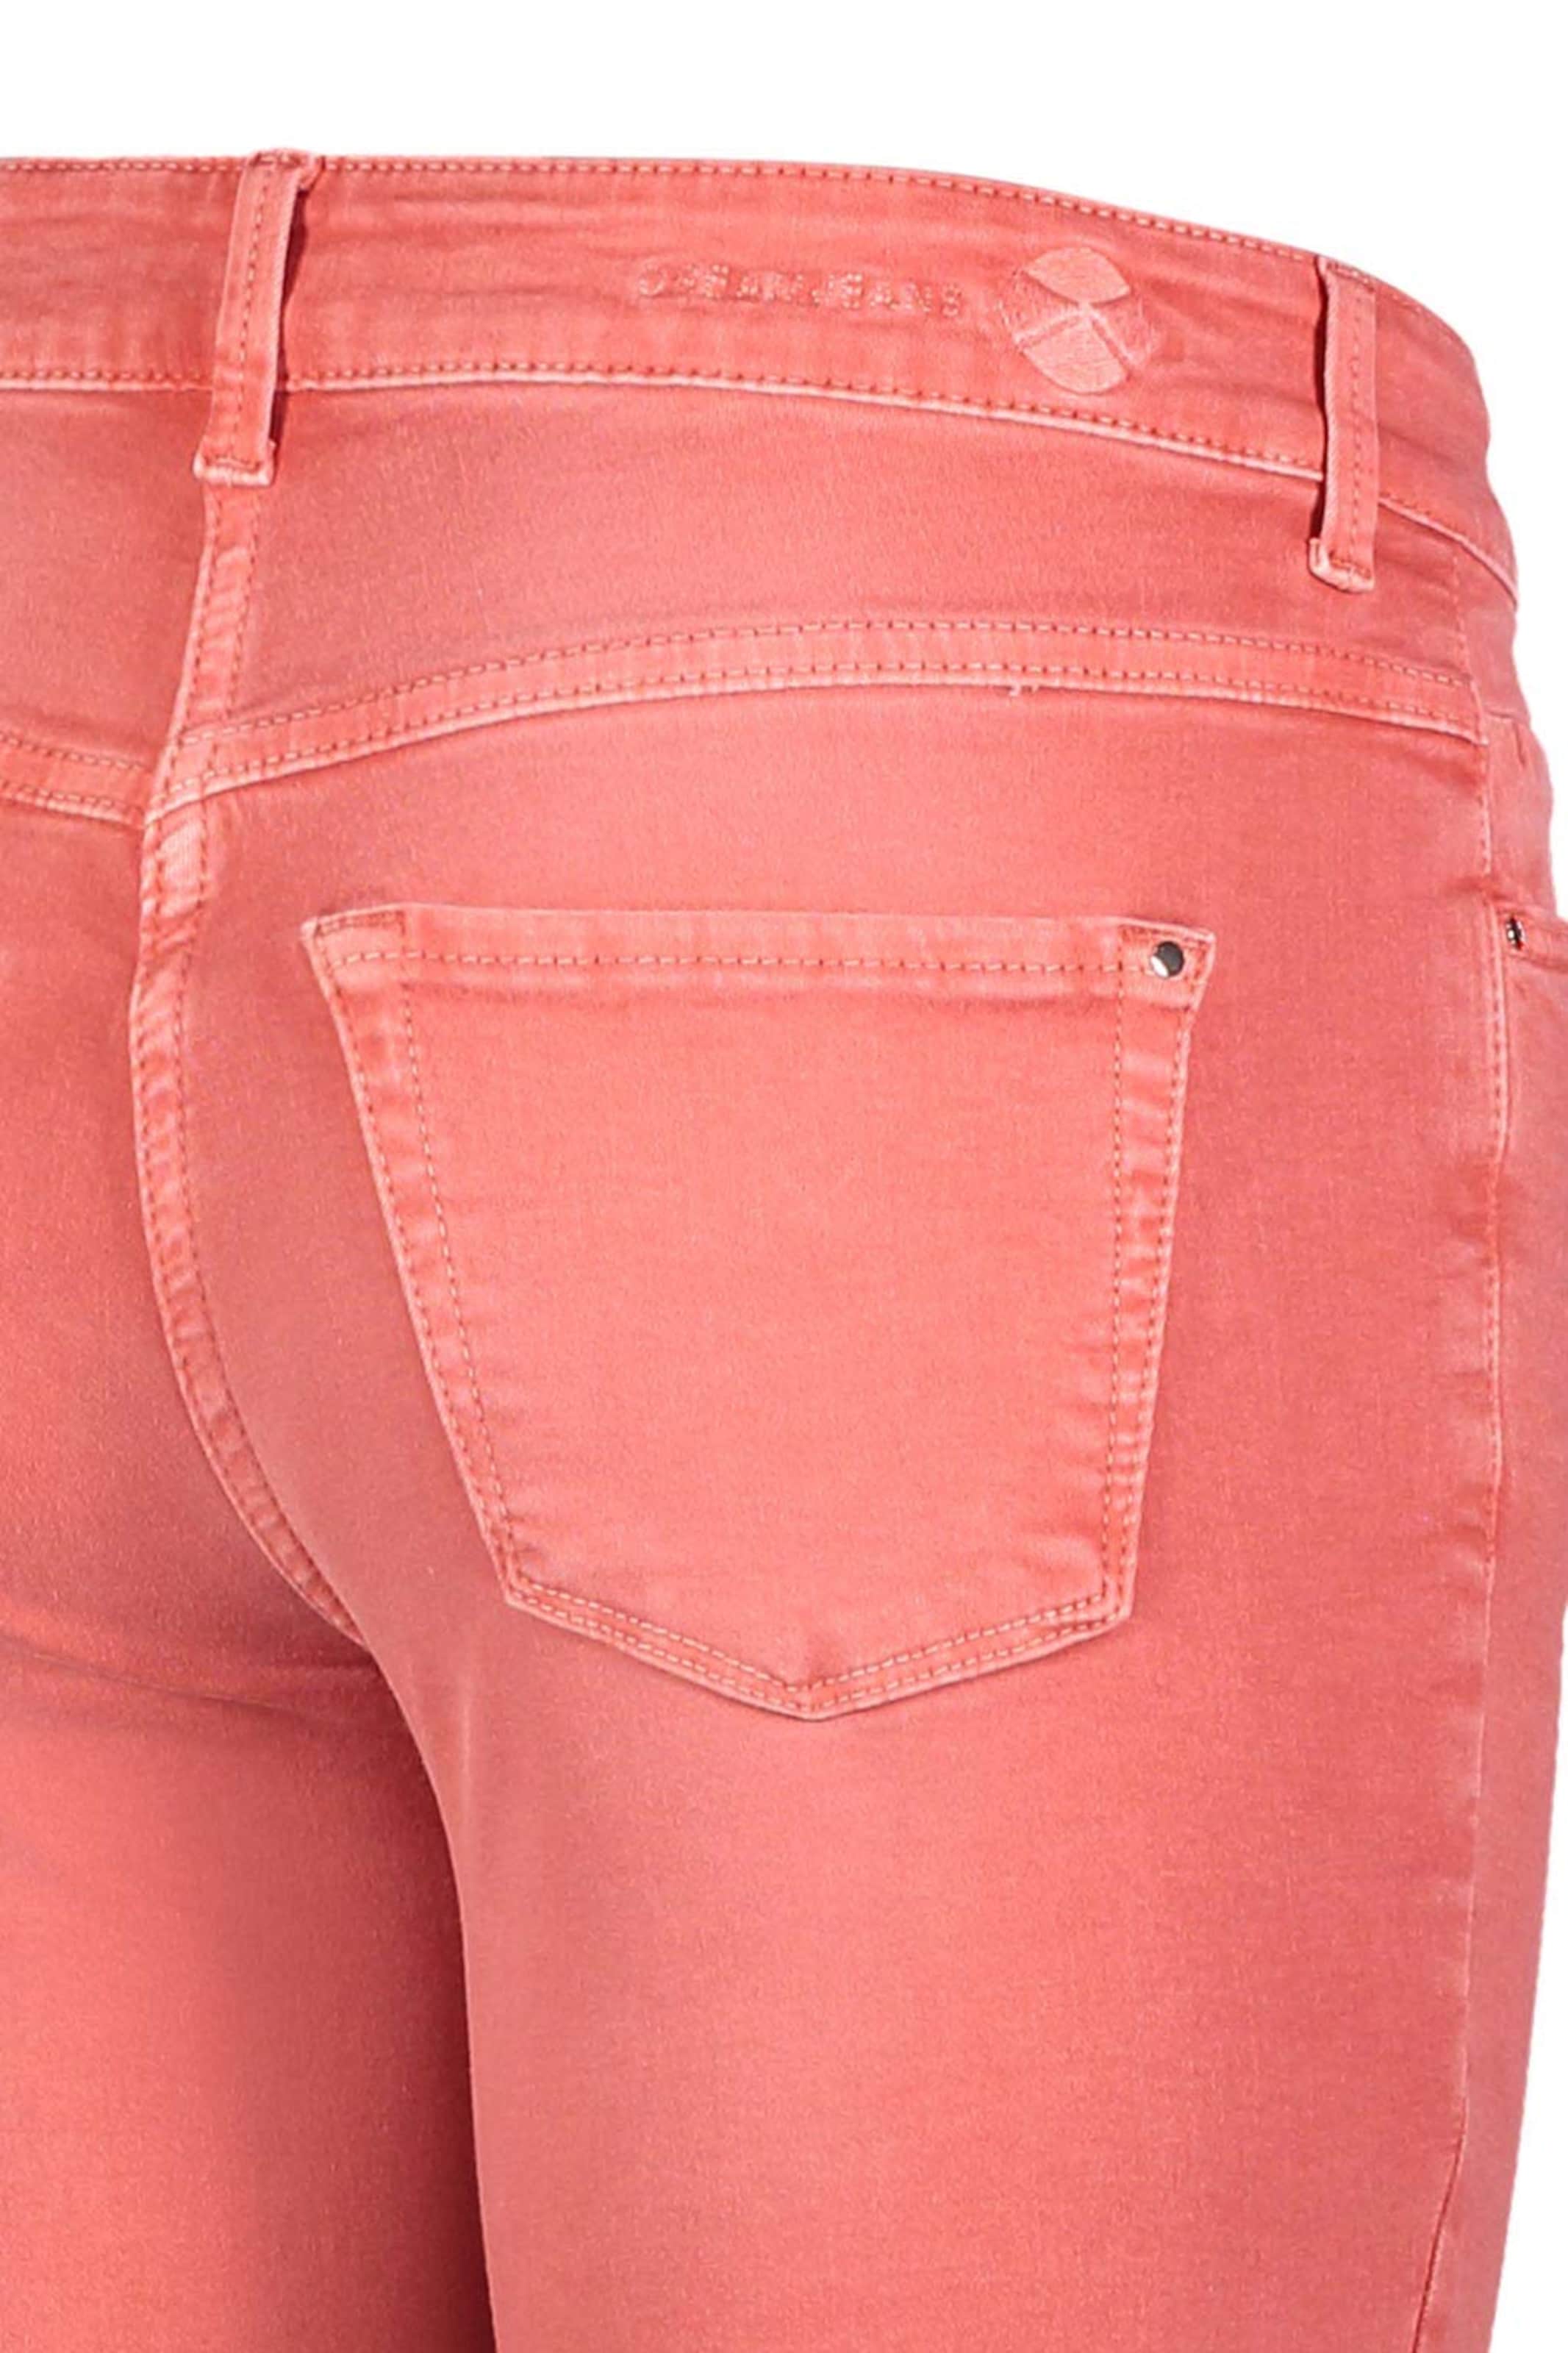 GERRY WEBER Jeans in Lachs 